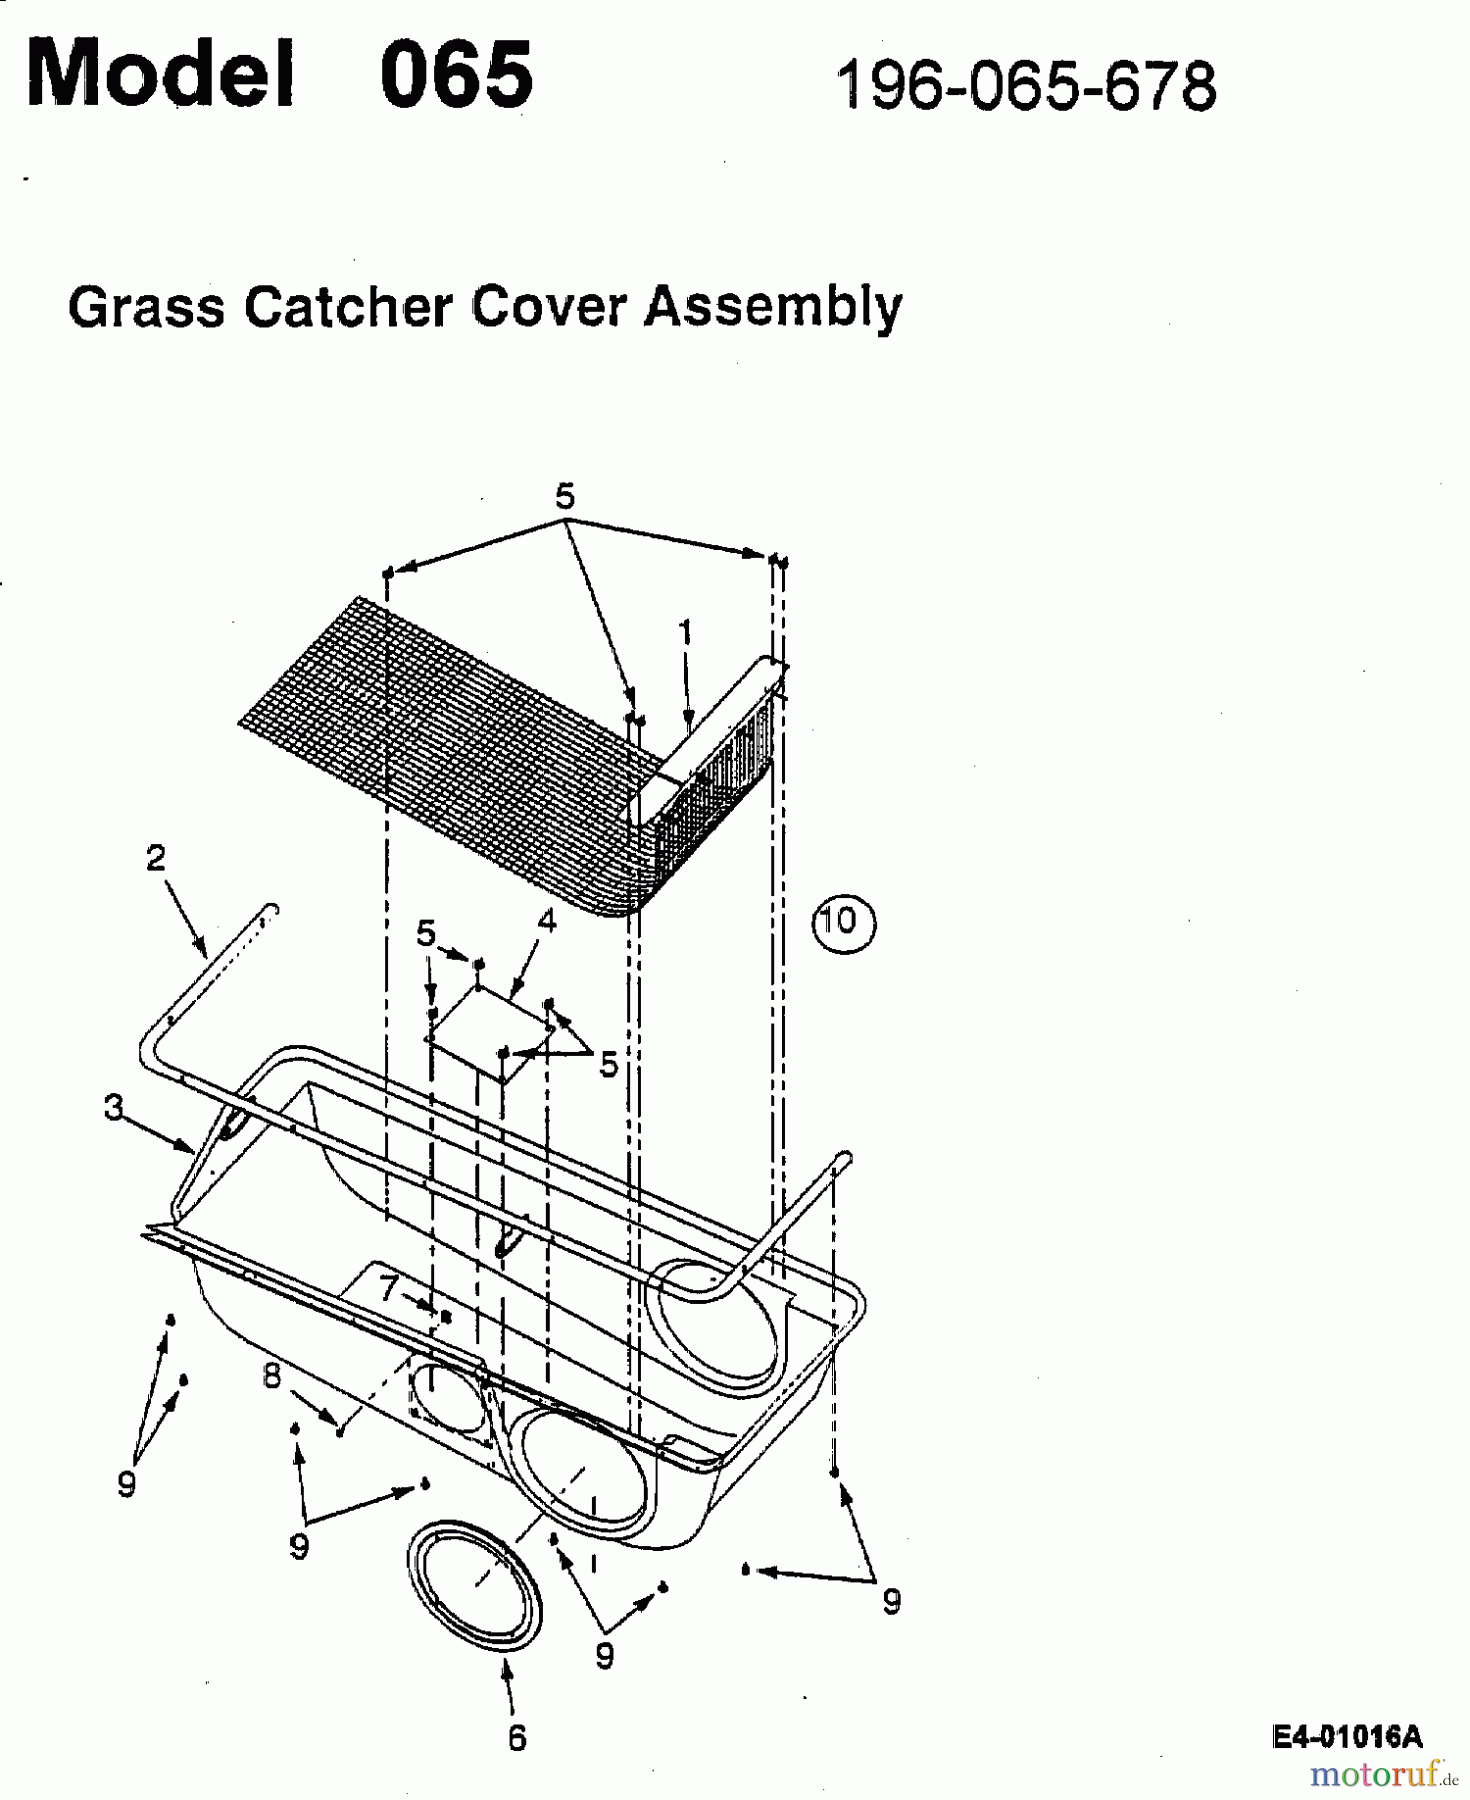  MTD Accessories Accessories garden and lawn tractors Grass catcher for 400 series 190-065-678  (2002) Cover grass bag